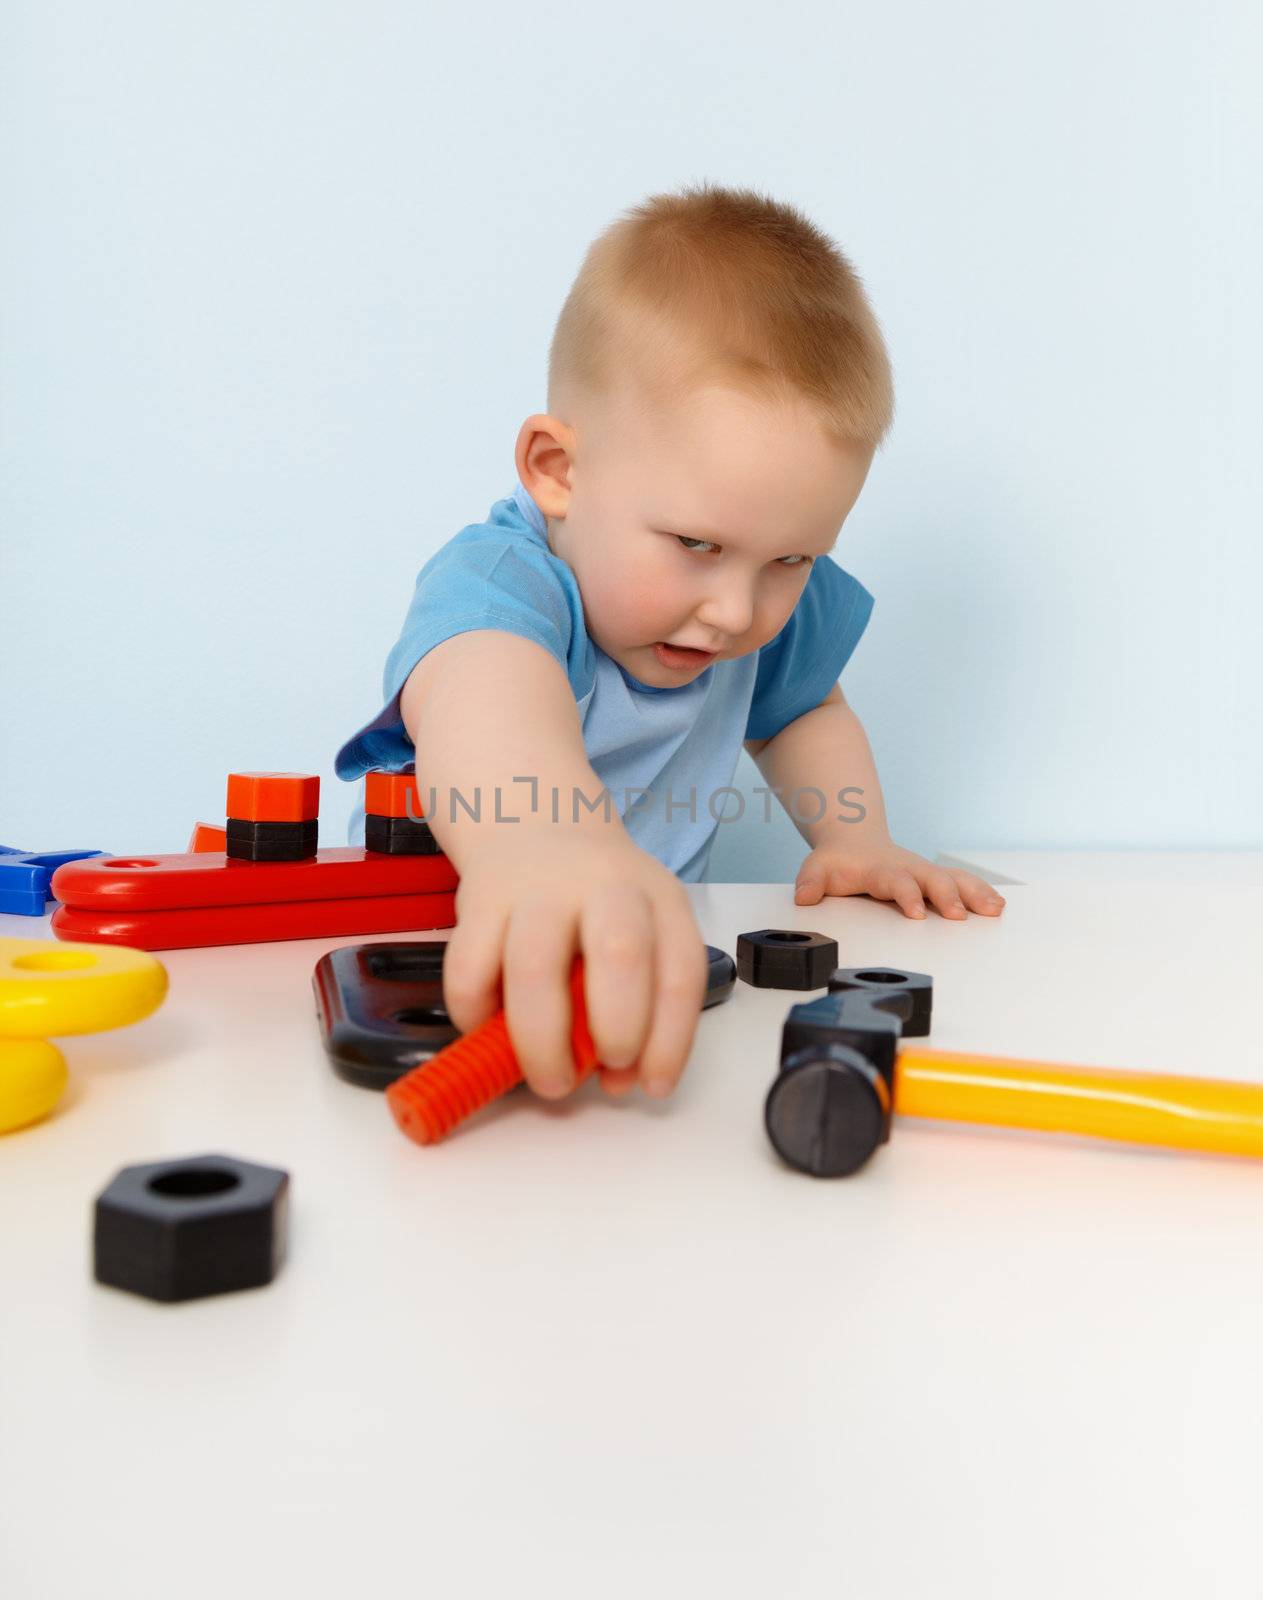 Little boy playing with a toy plastic constructor on blue background